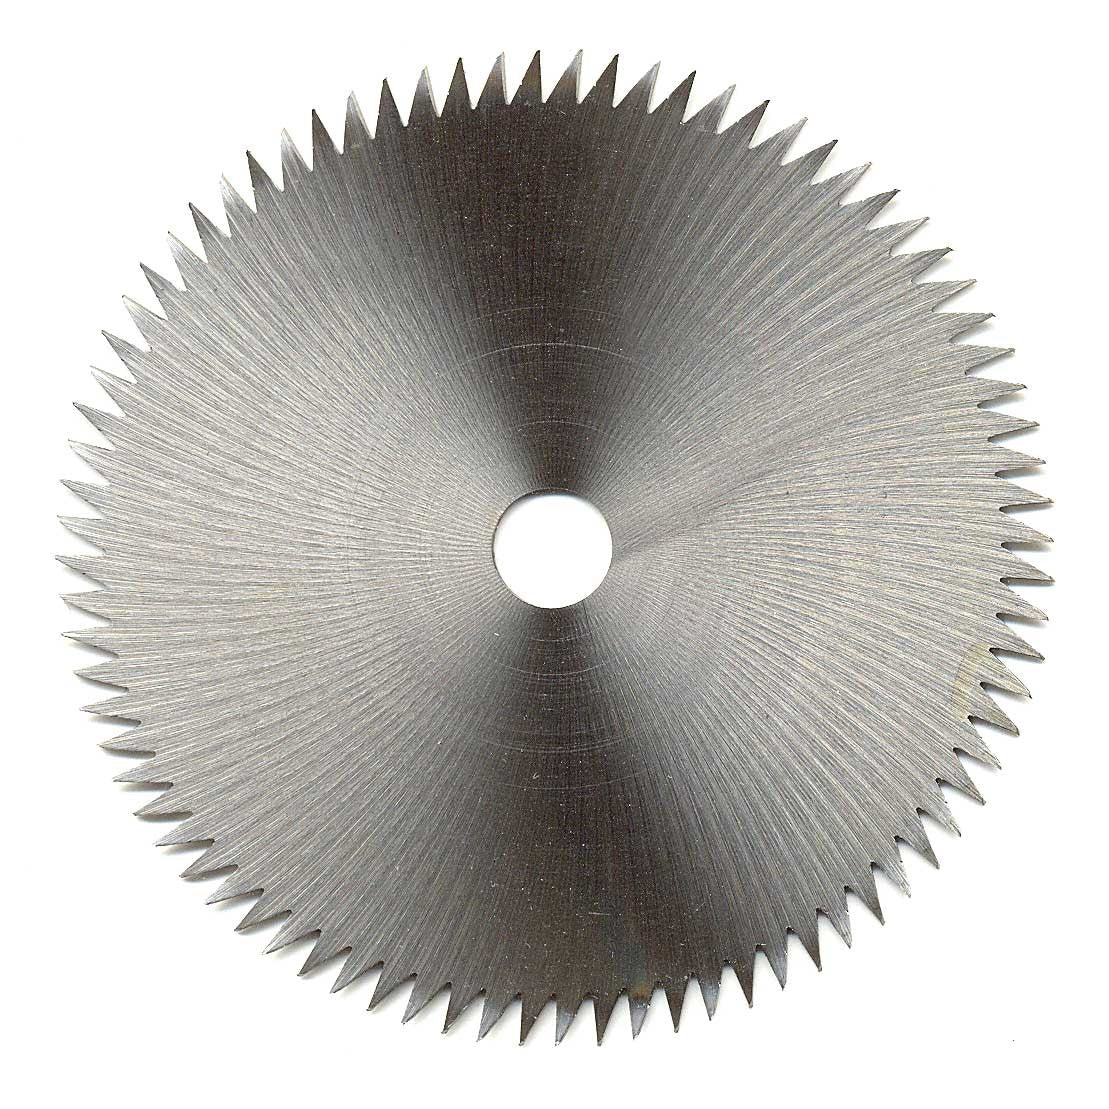 80 Tooth Saw Blade (3 - 1/4 Inch Dia., 10mm Hole)